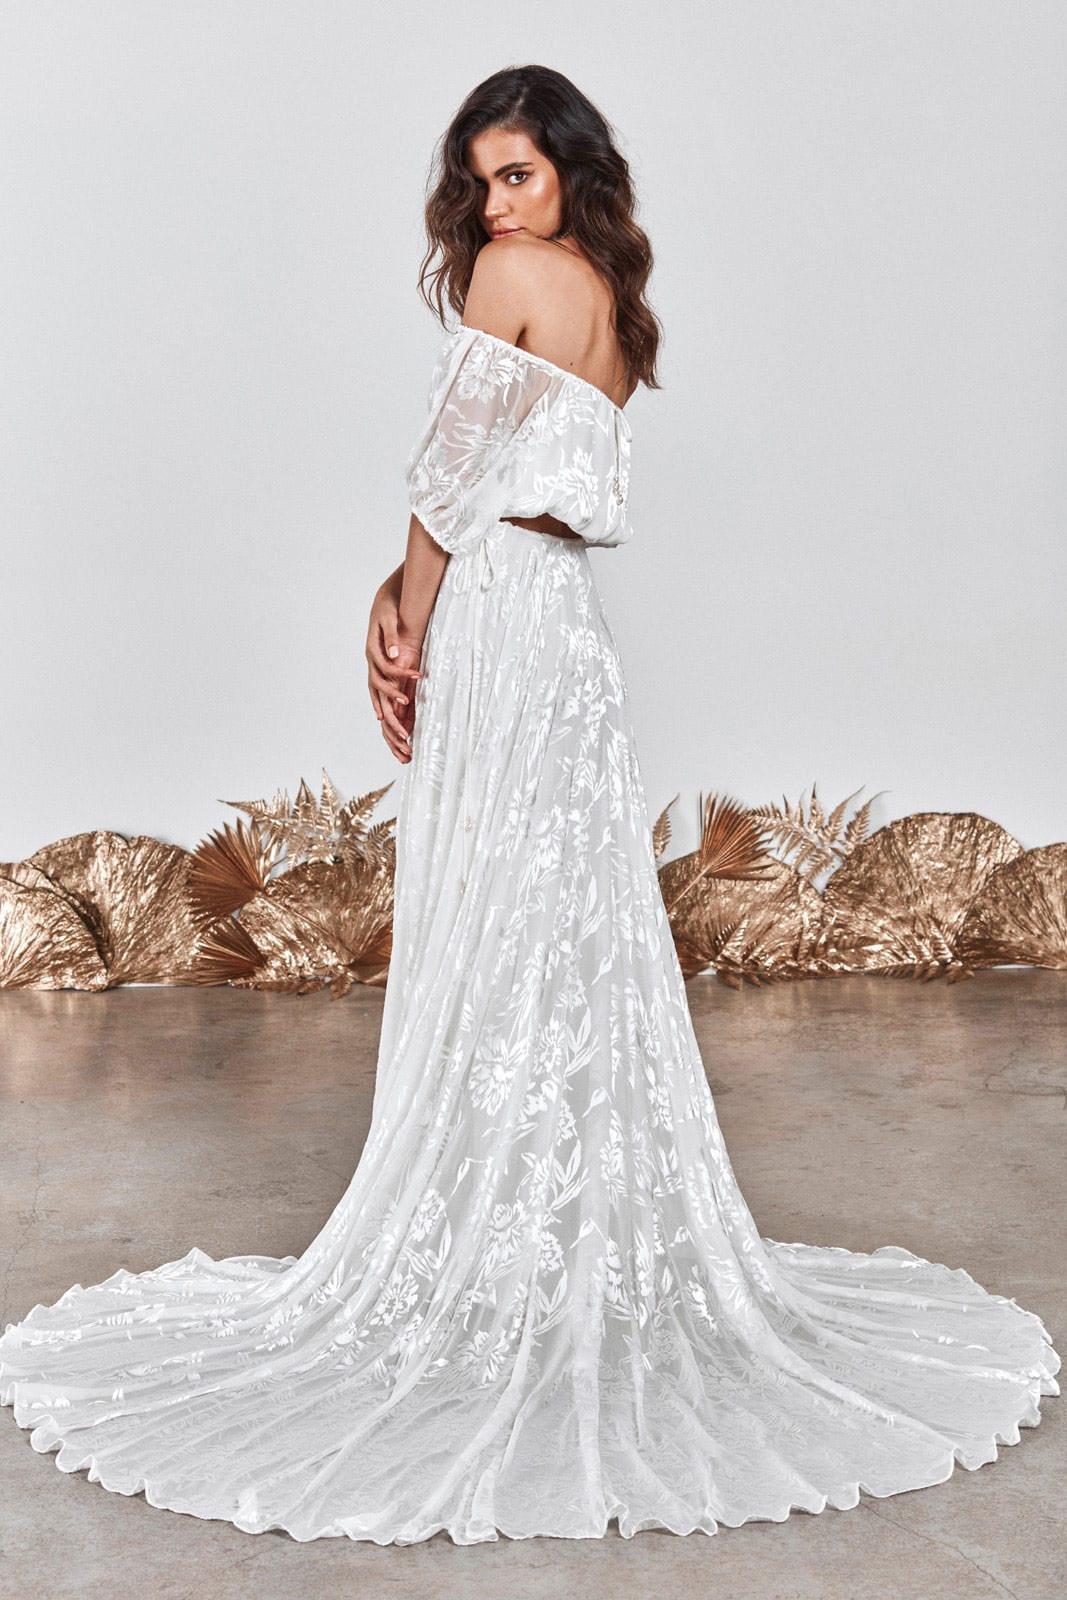 Two Piece Wedding Dresses & Gowns | Bridal Separates